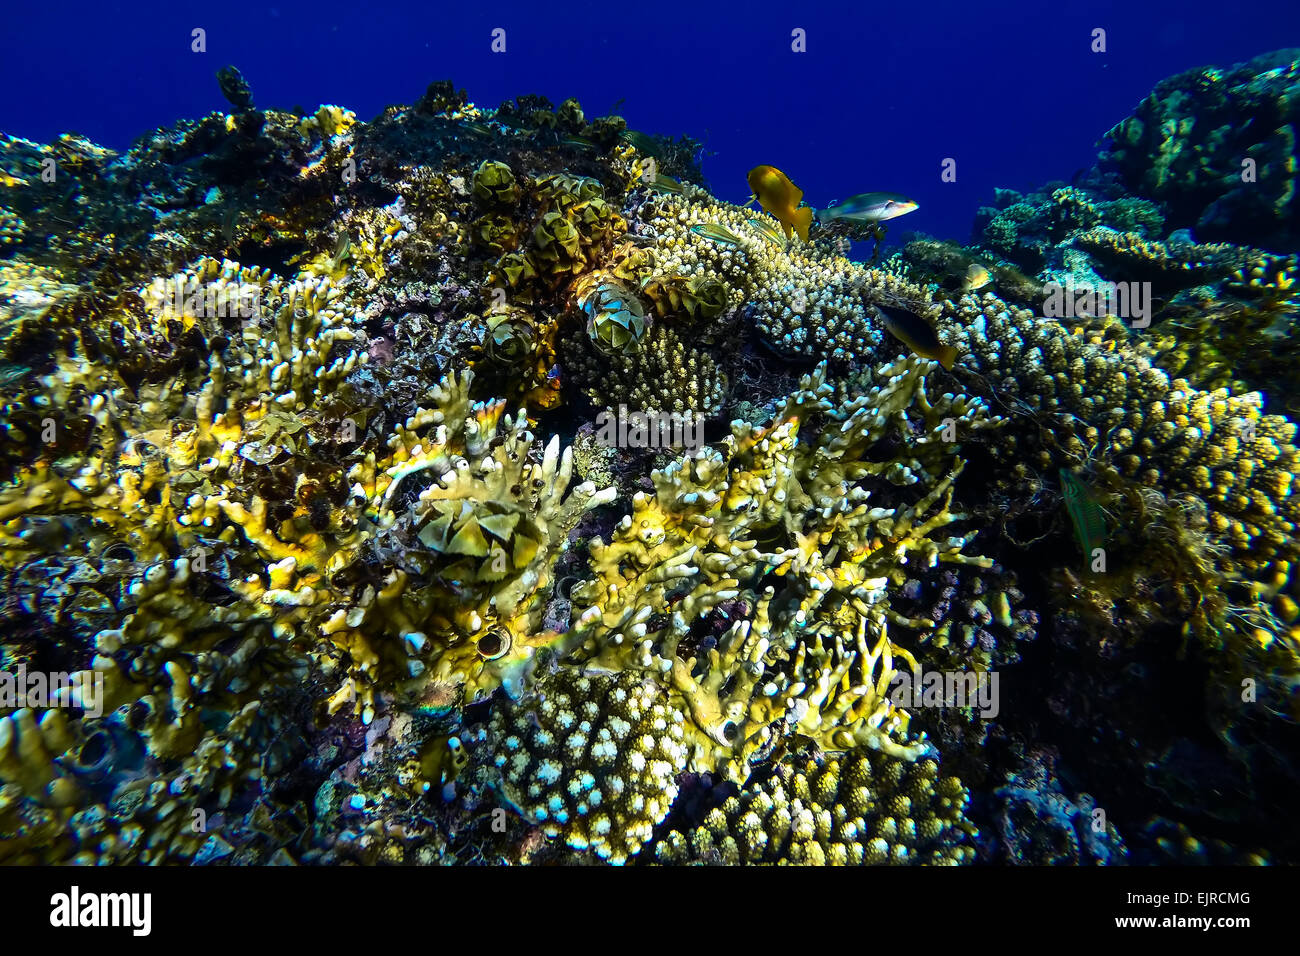 red sea coral reef with hard corals, fishes and sunny sky shining through clean water - underwater photo Stock Photo